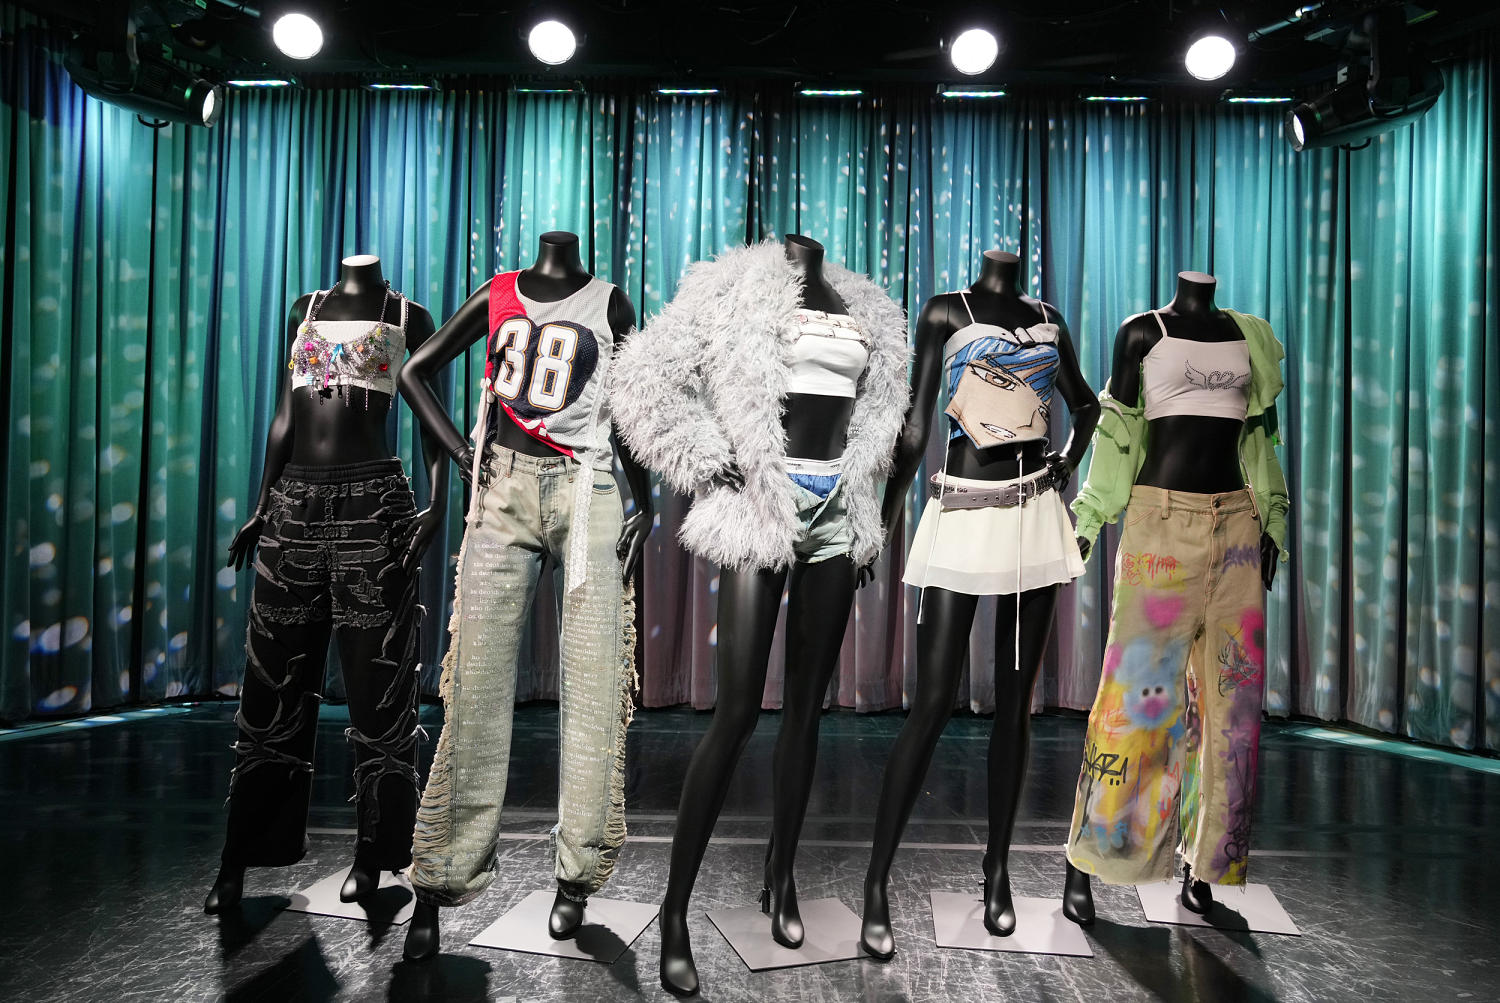 Grammy Museum to launch K-pop exhibit featuring BTS, LE SSERAFIM outfits and photos